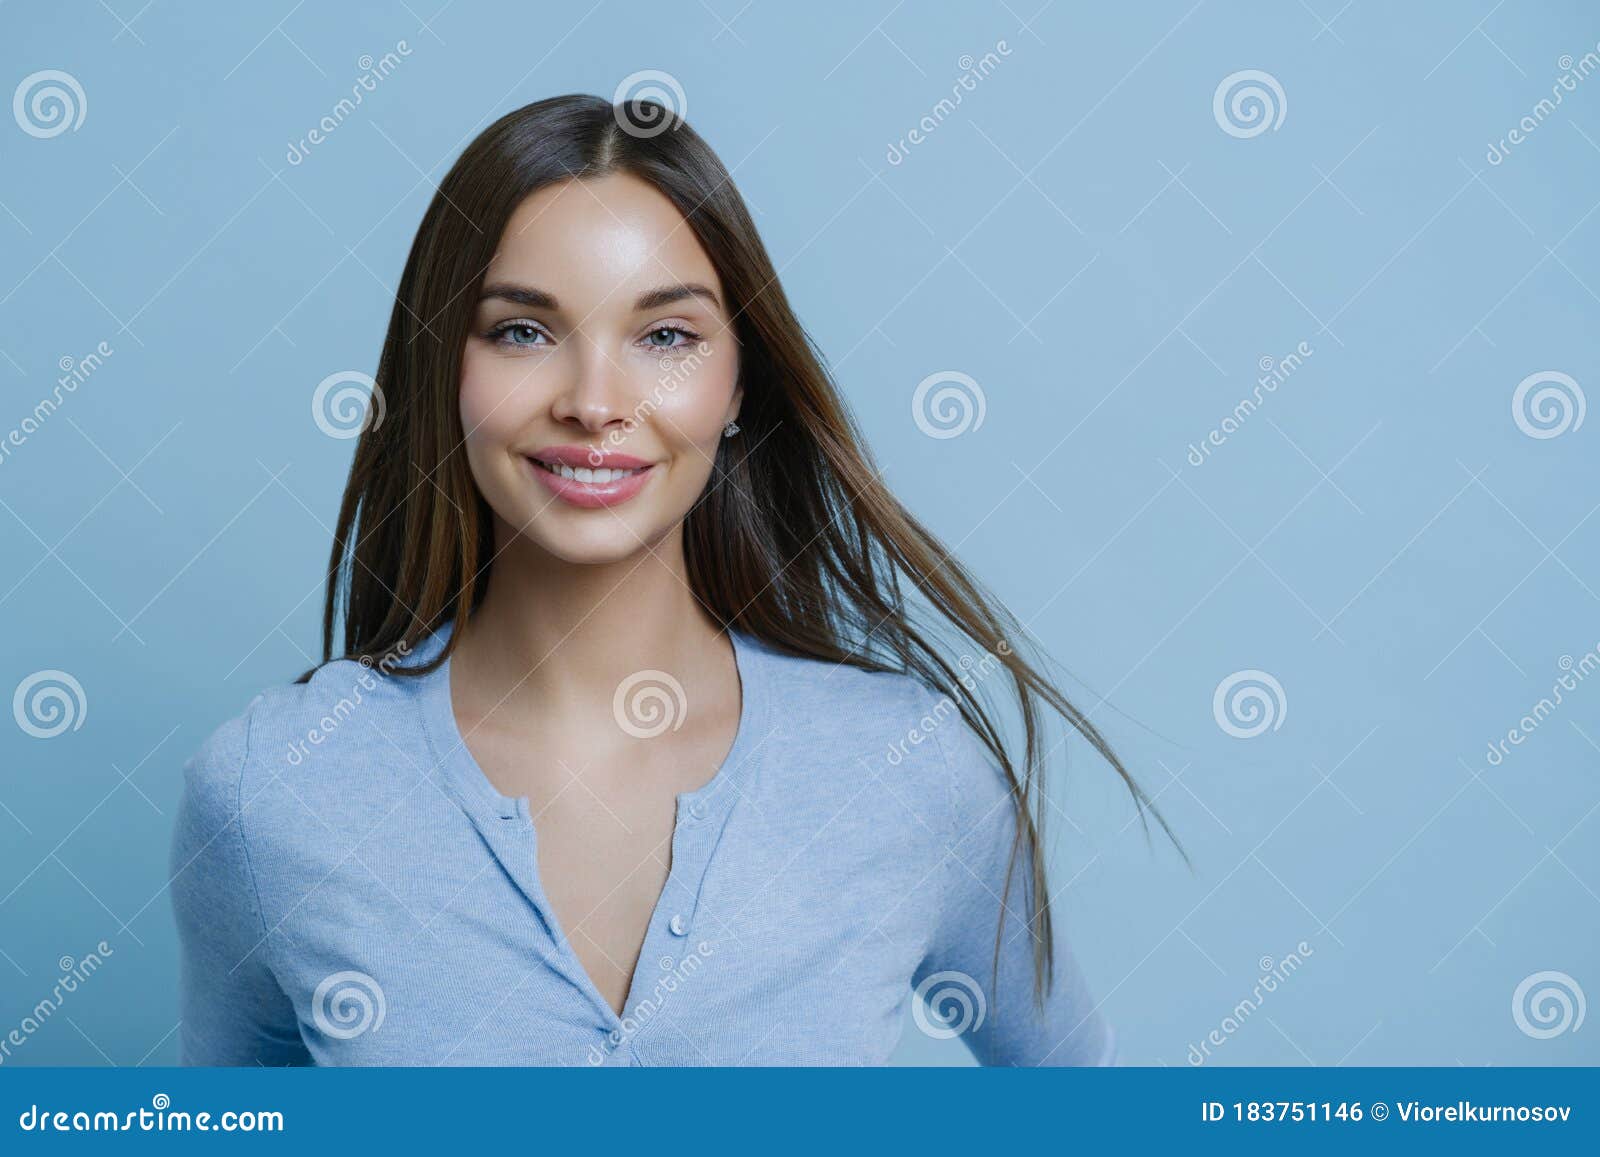 Horizontal Shot of Lovely Woman Has Healthy Beautiful Hair, Makeup, Happy  To Get New Job Position, Comes To Interview, Gets Ready Stock Photo - Image  of healthy, cheerful: 183751146